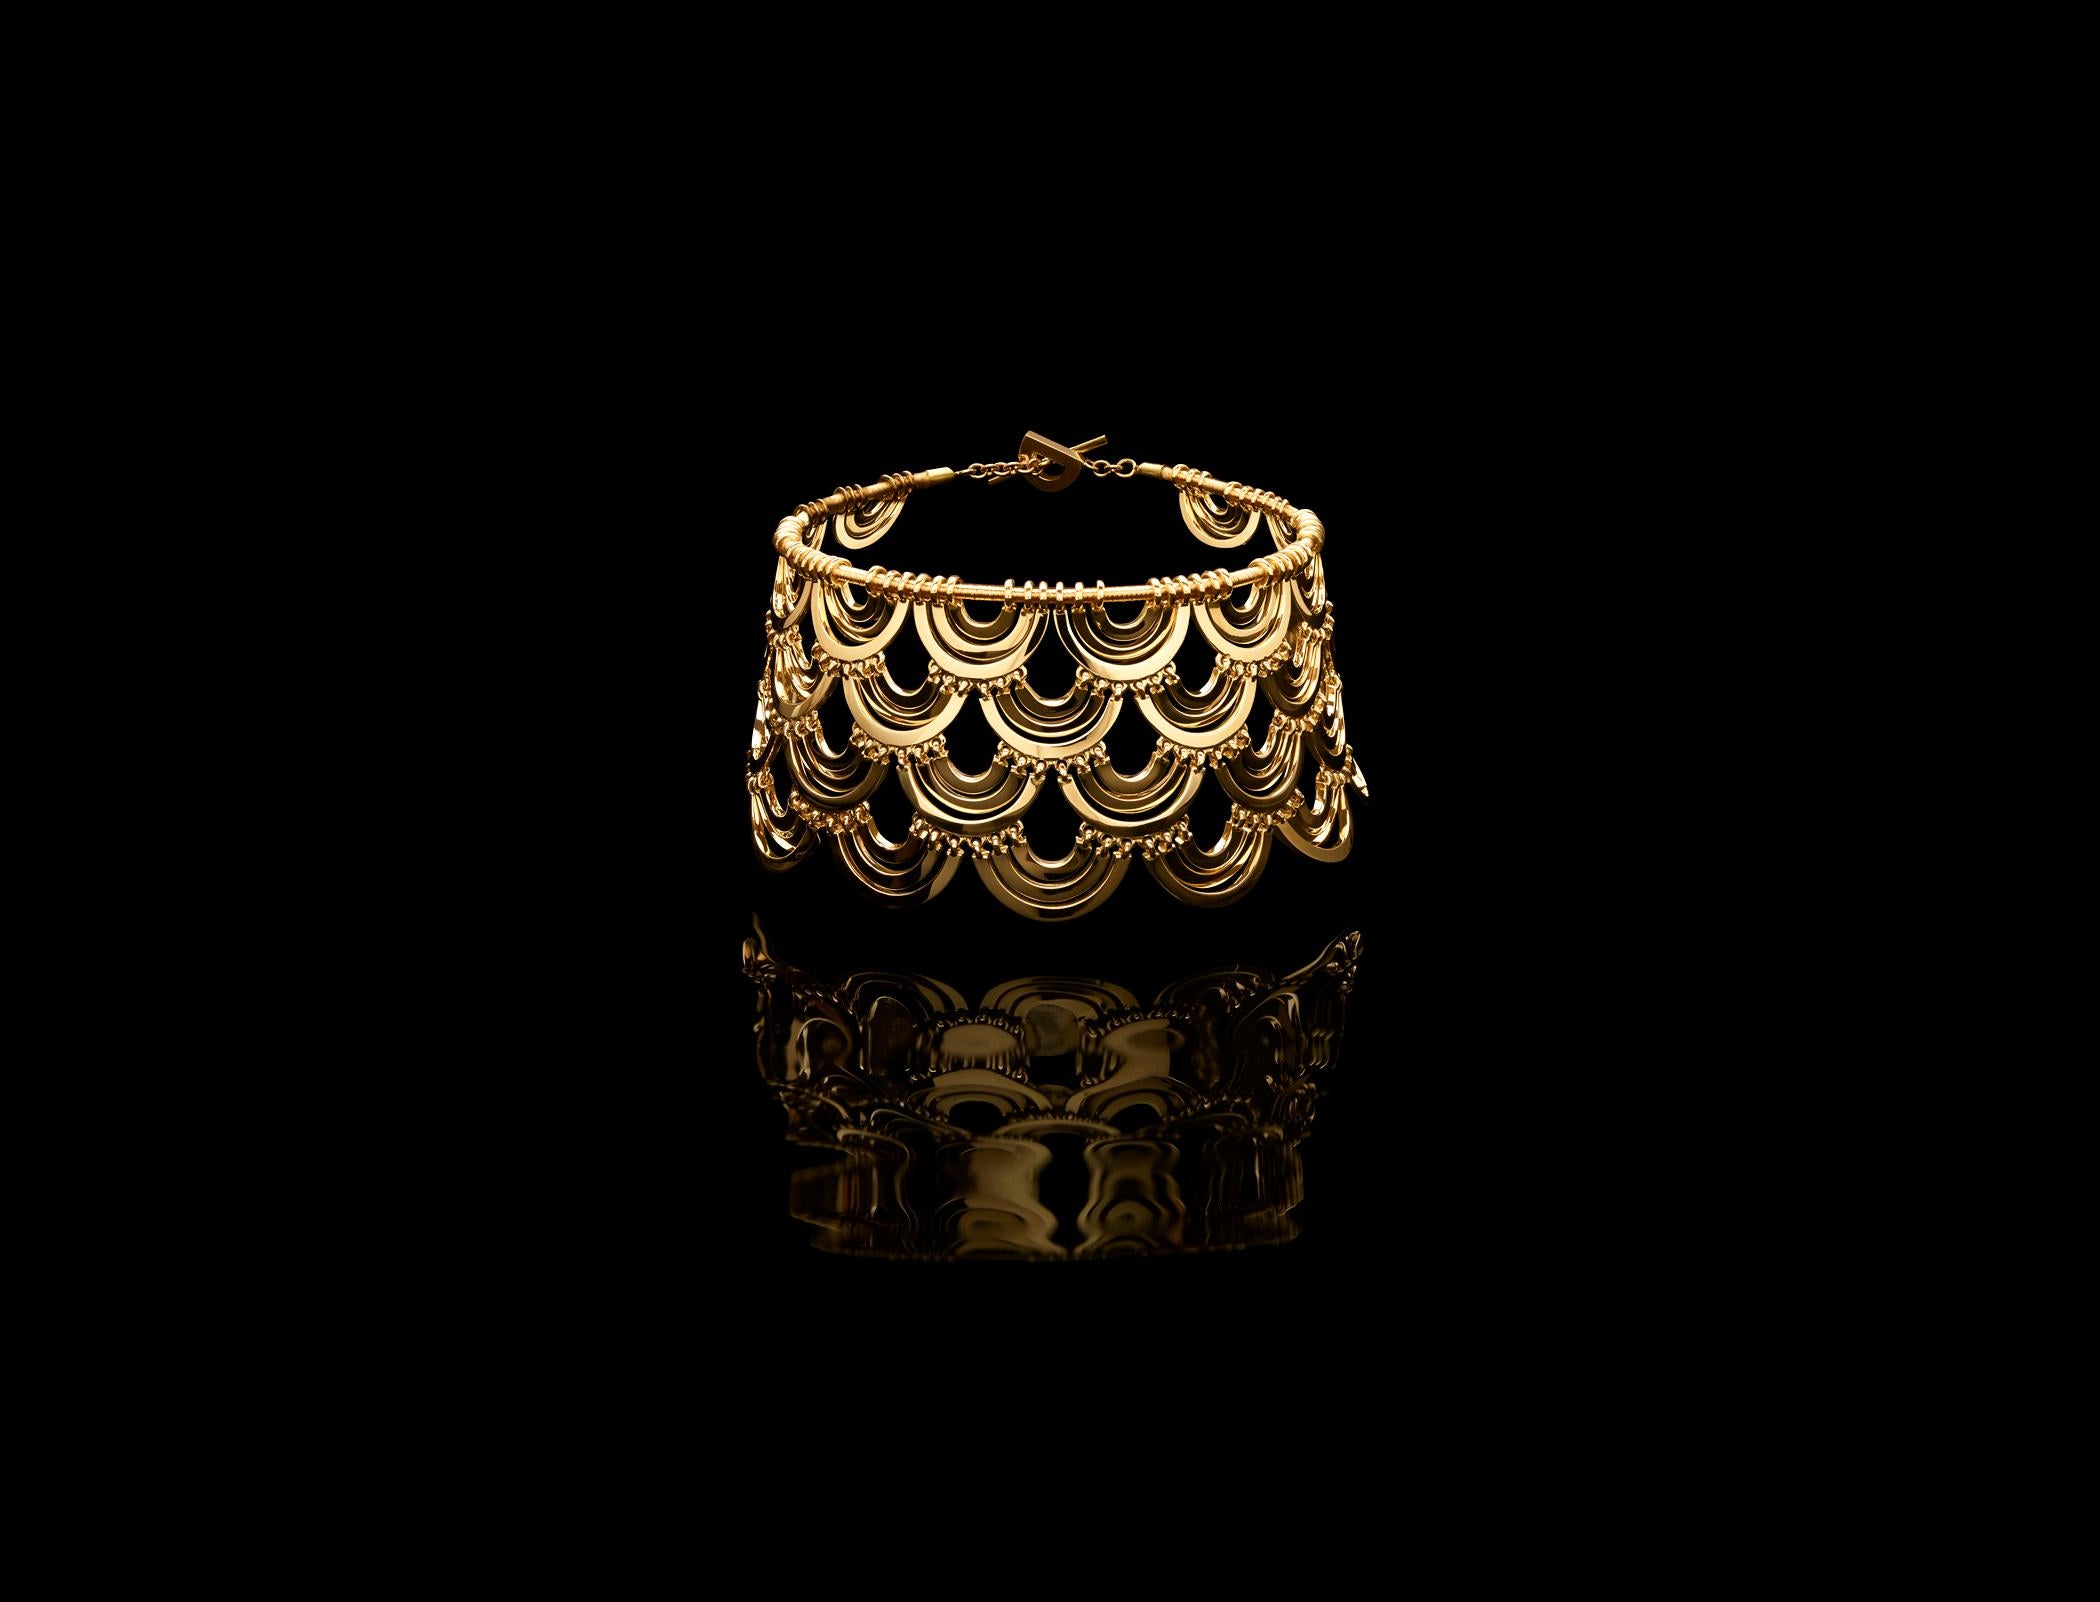 18K Yellow Gold Wide Bracelet, Exclusive

From the CADAR Water Collection.
